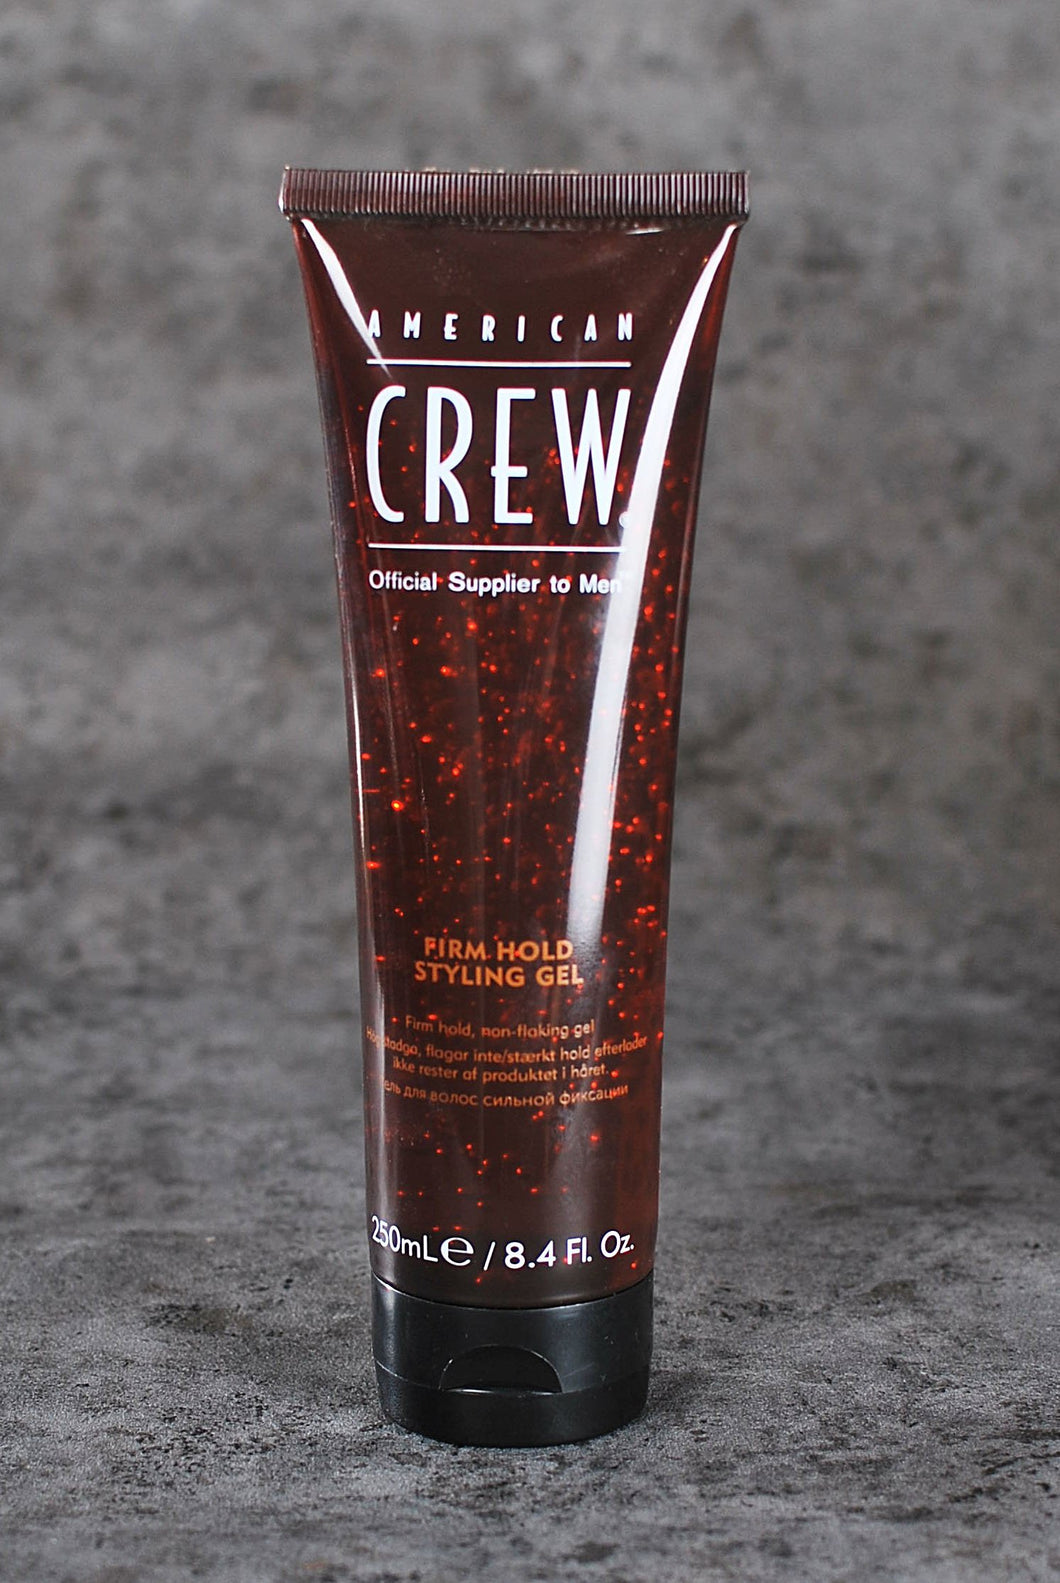 American Crew - Firm Hold Styling Gel